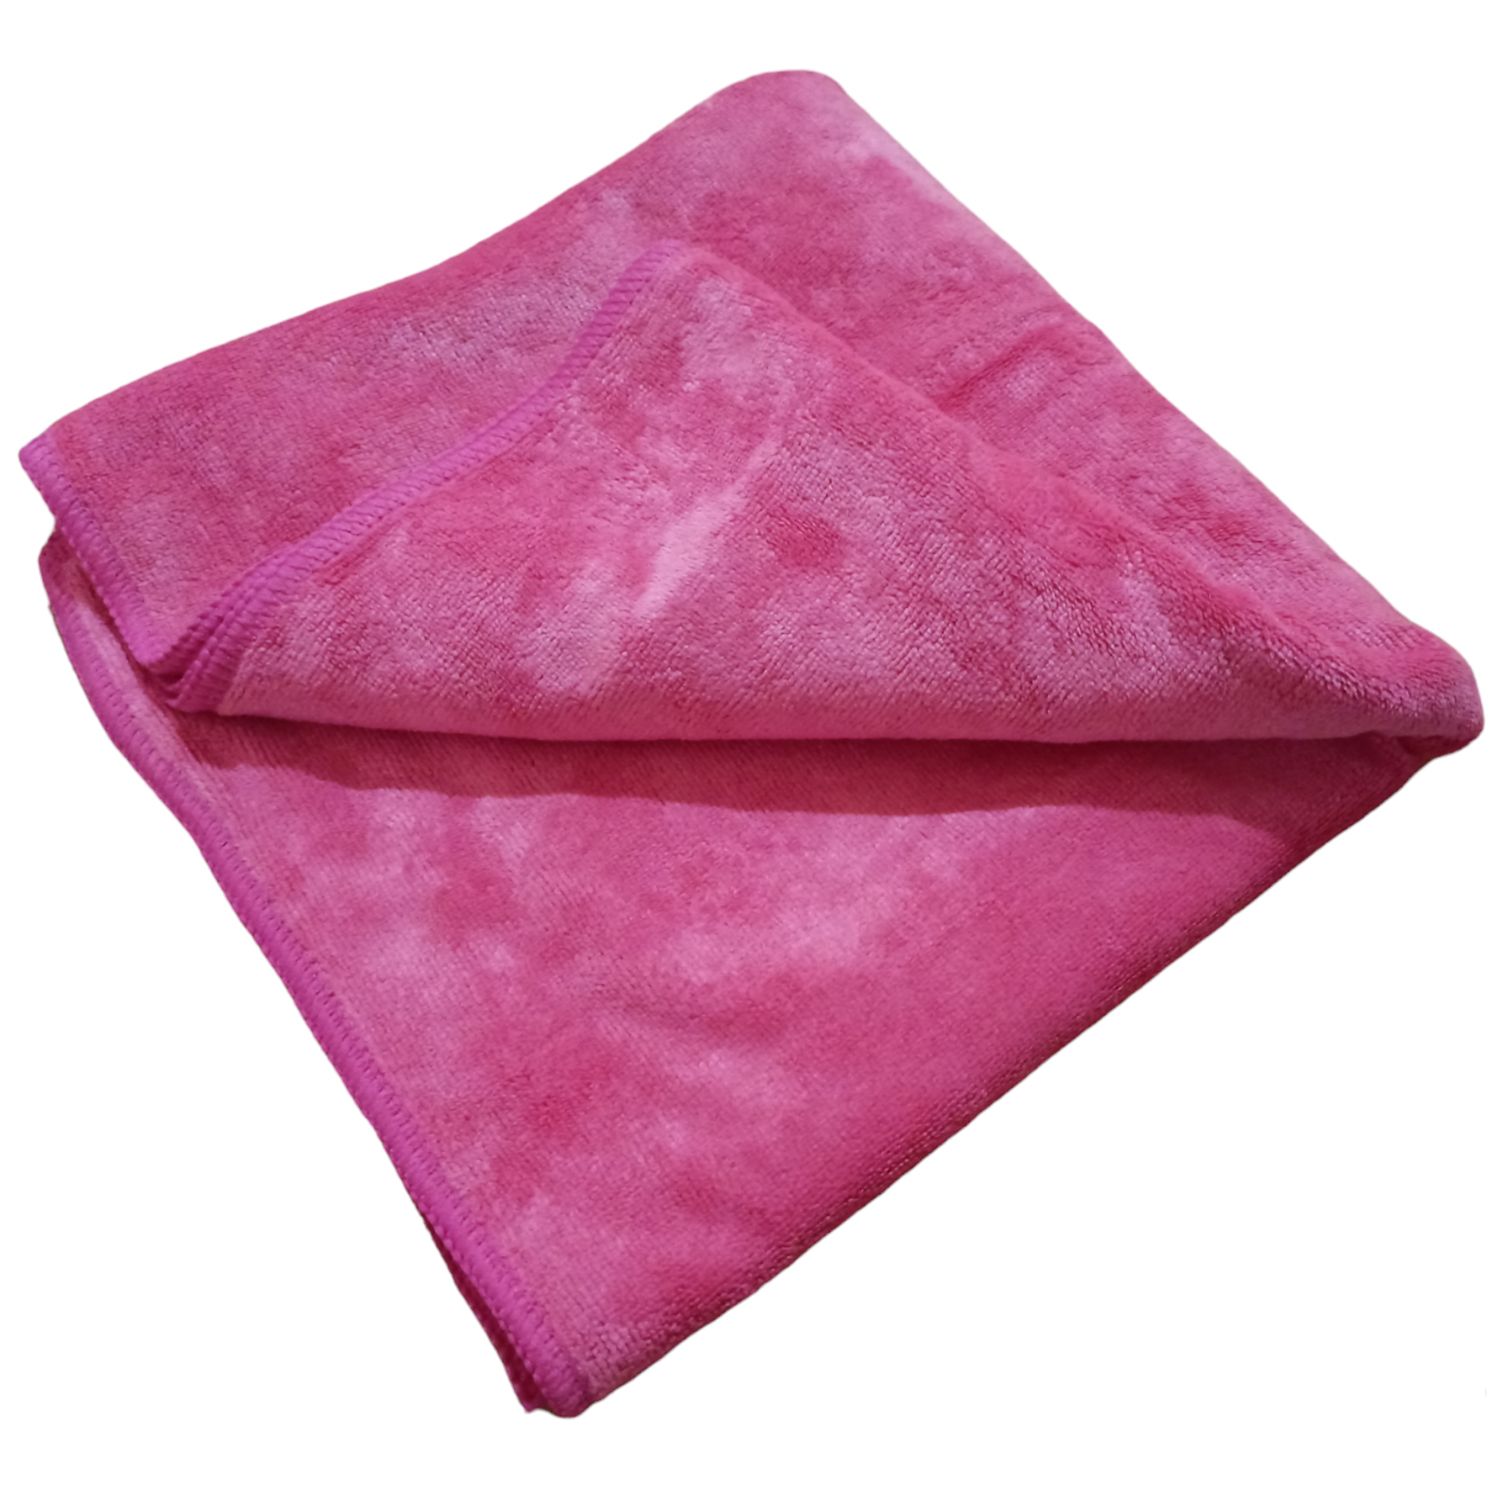 Microfiber Cloth for Car and Bike Cleaning and Detailing Extra Soft and Lint Free Cloth 400 GSM 40 x 60cm, Pink (Pack of 1)